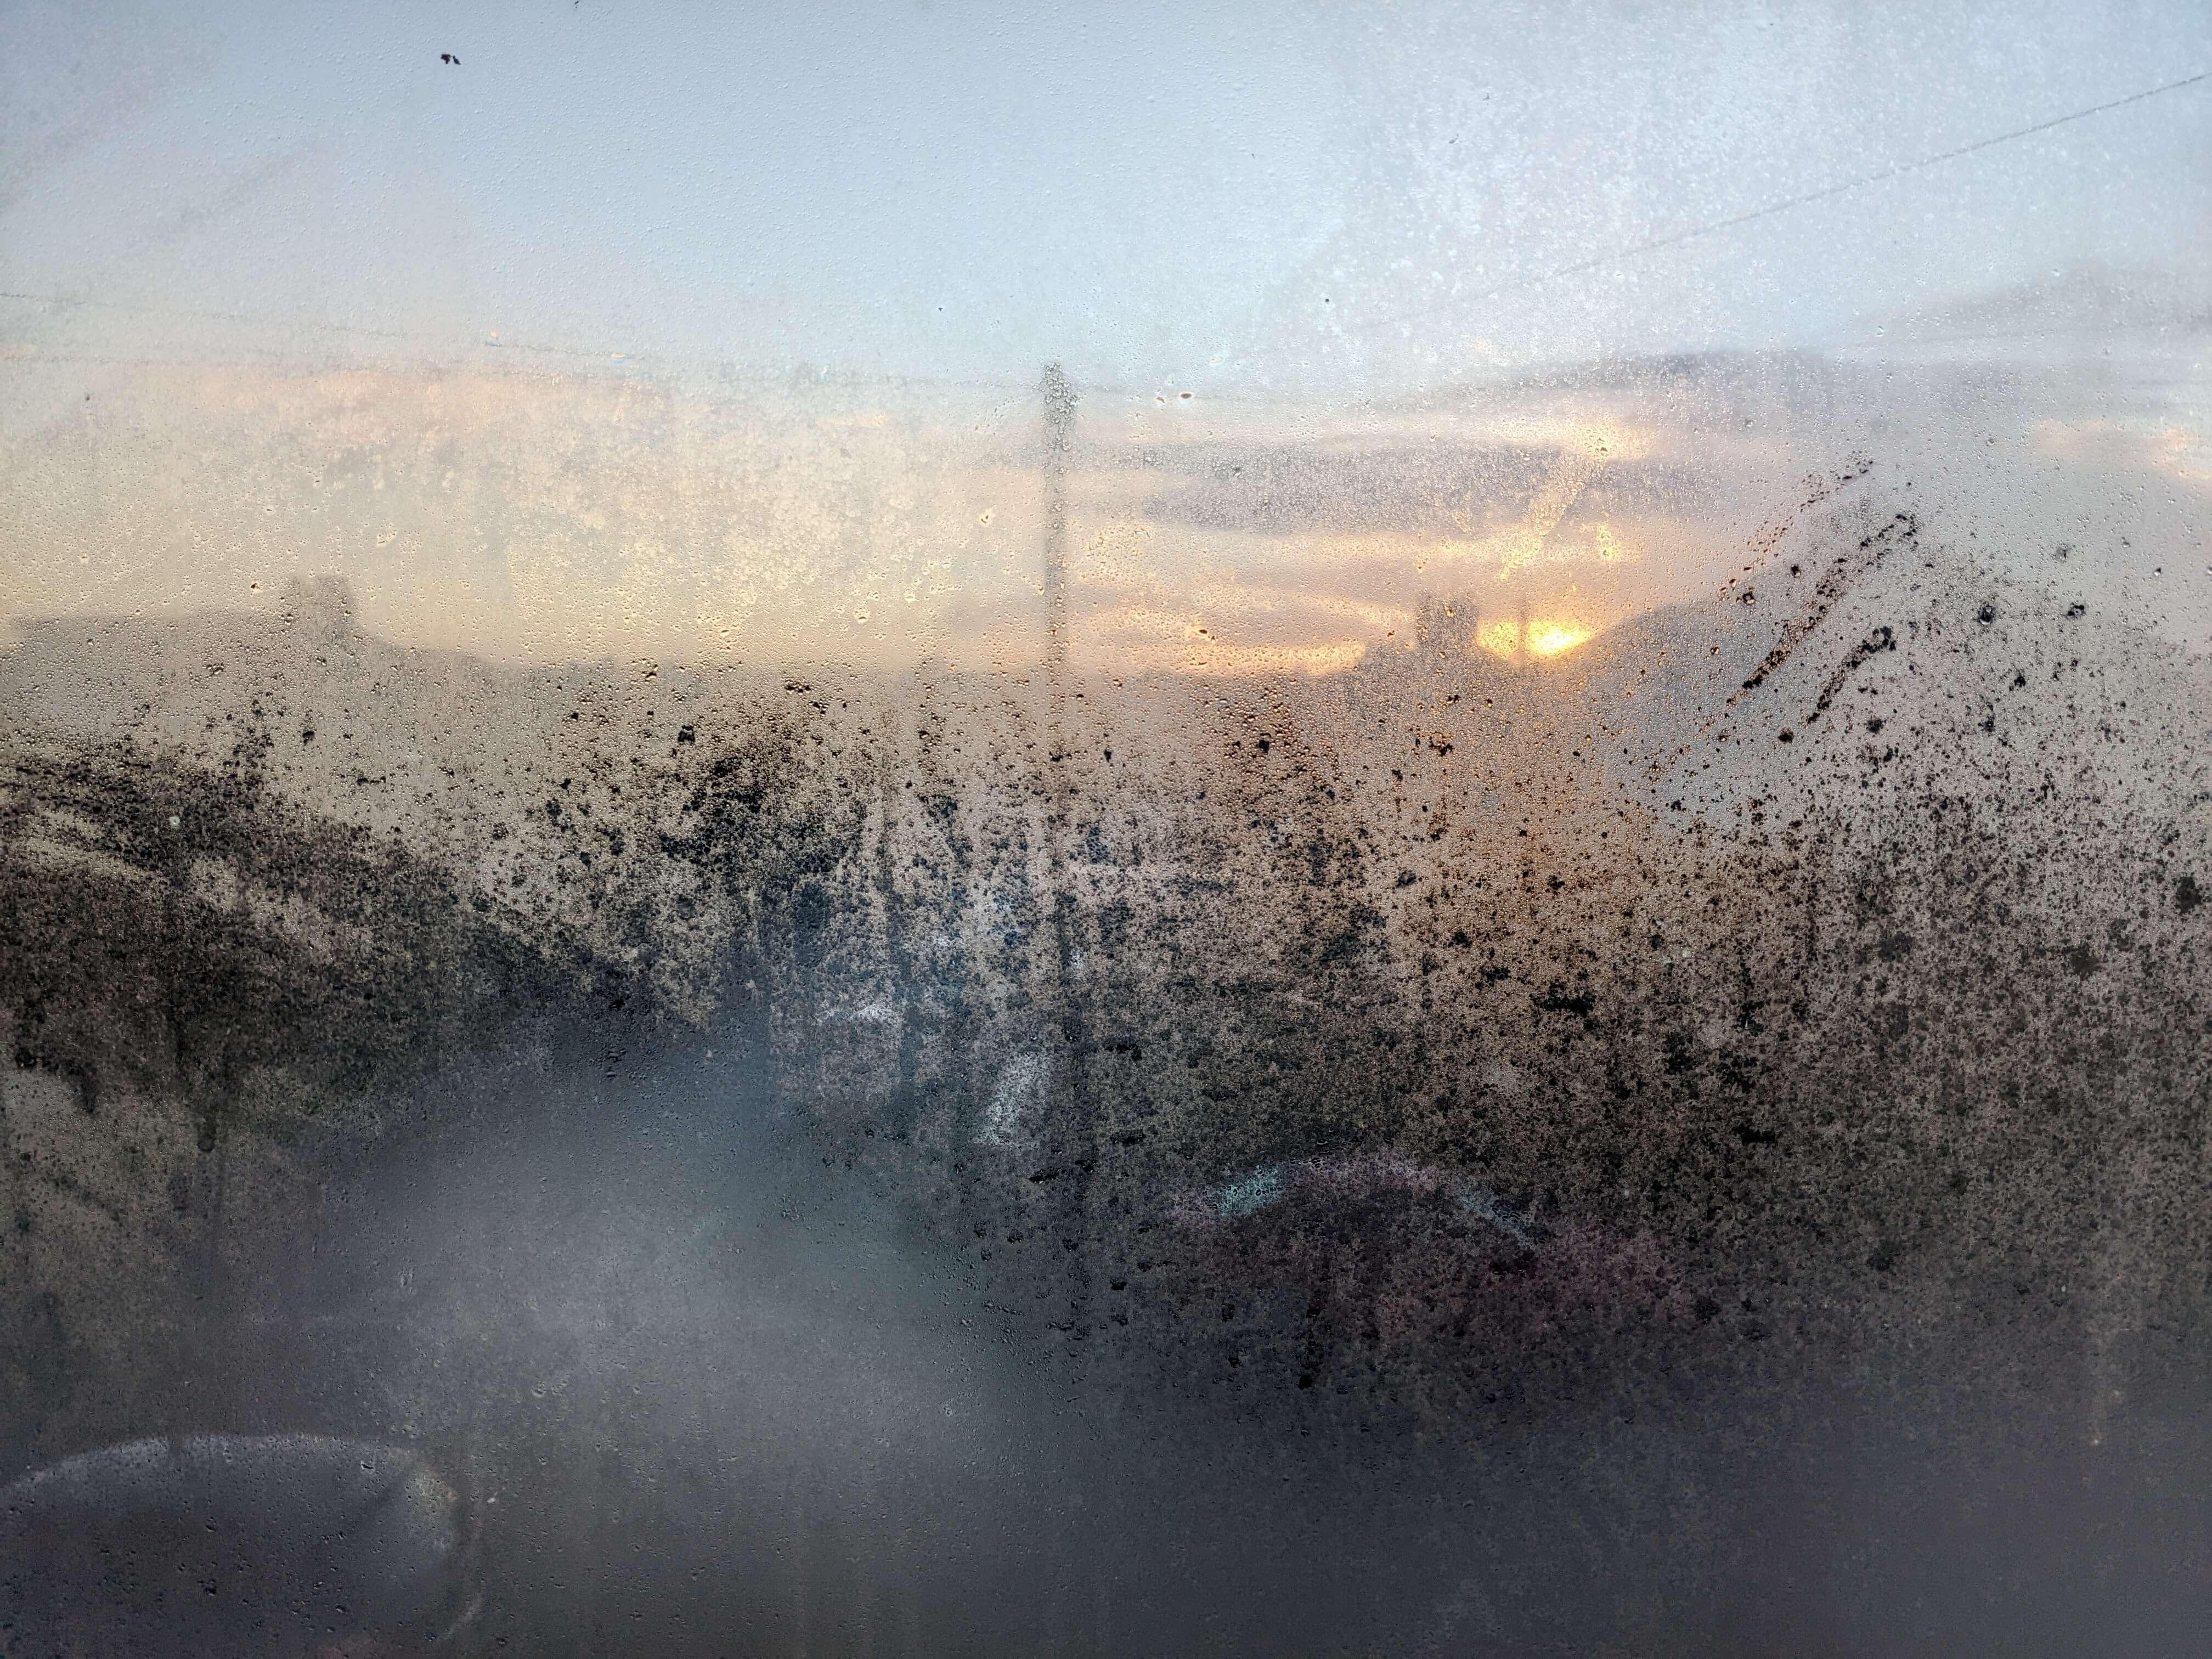 How To Stop Condensation On Windows